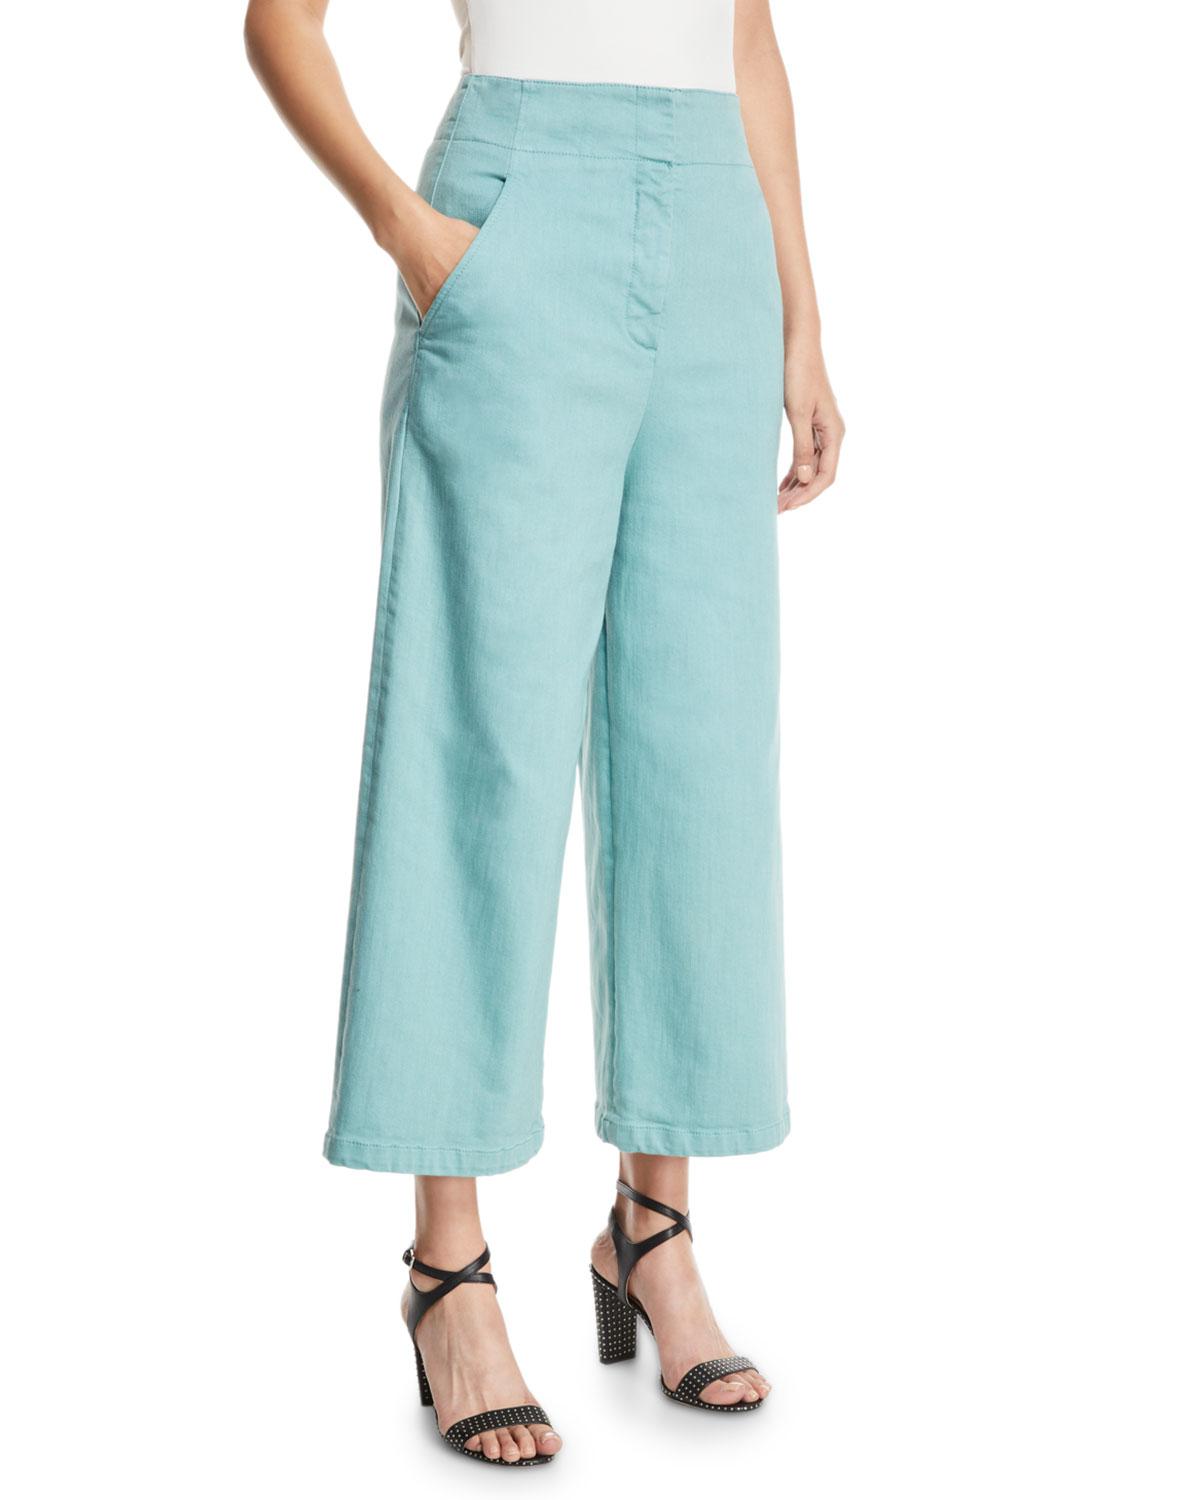 Tibi Demi Wide-leg Garment-dyed Twill Cropped Jeans in Blue - Lyst